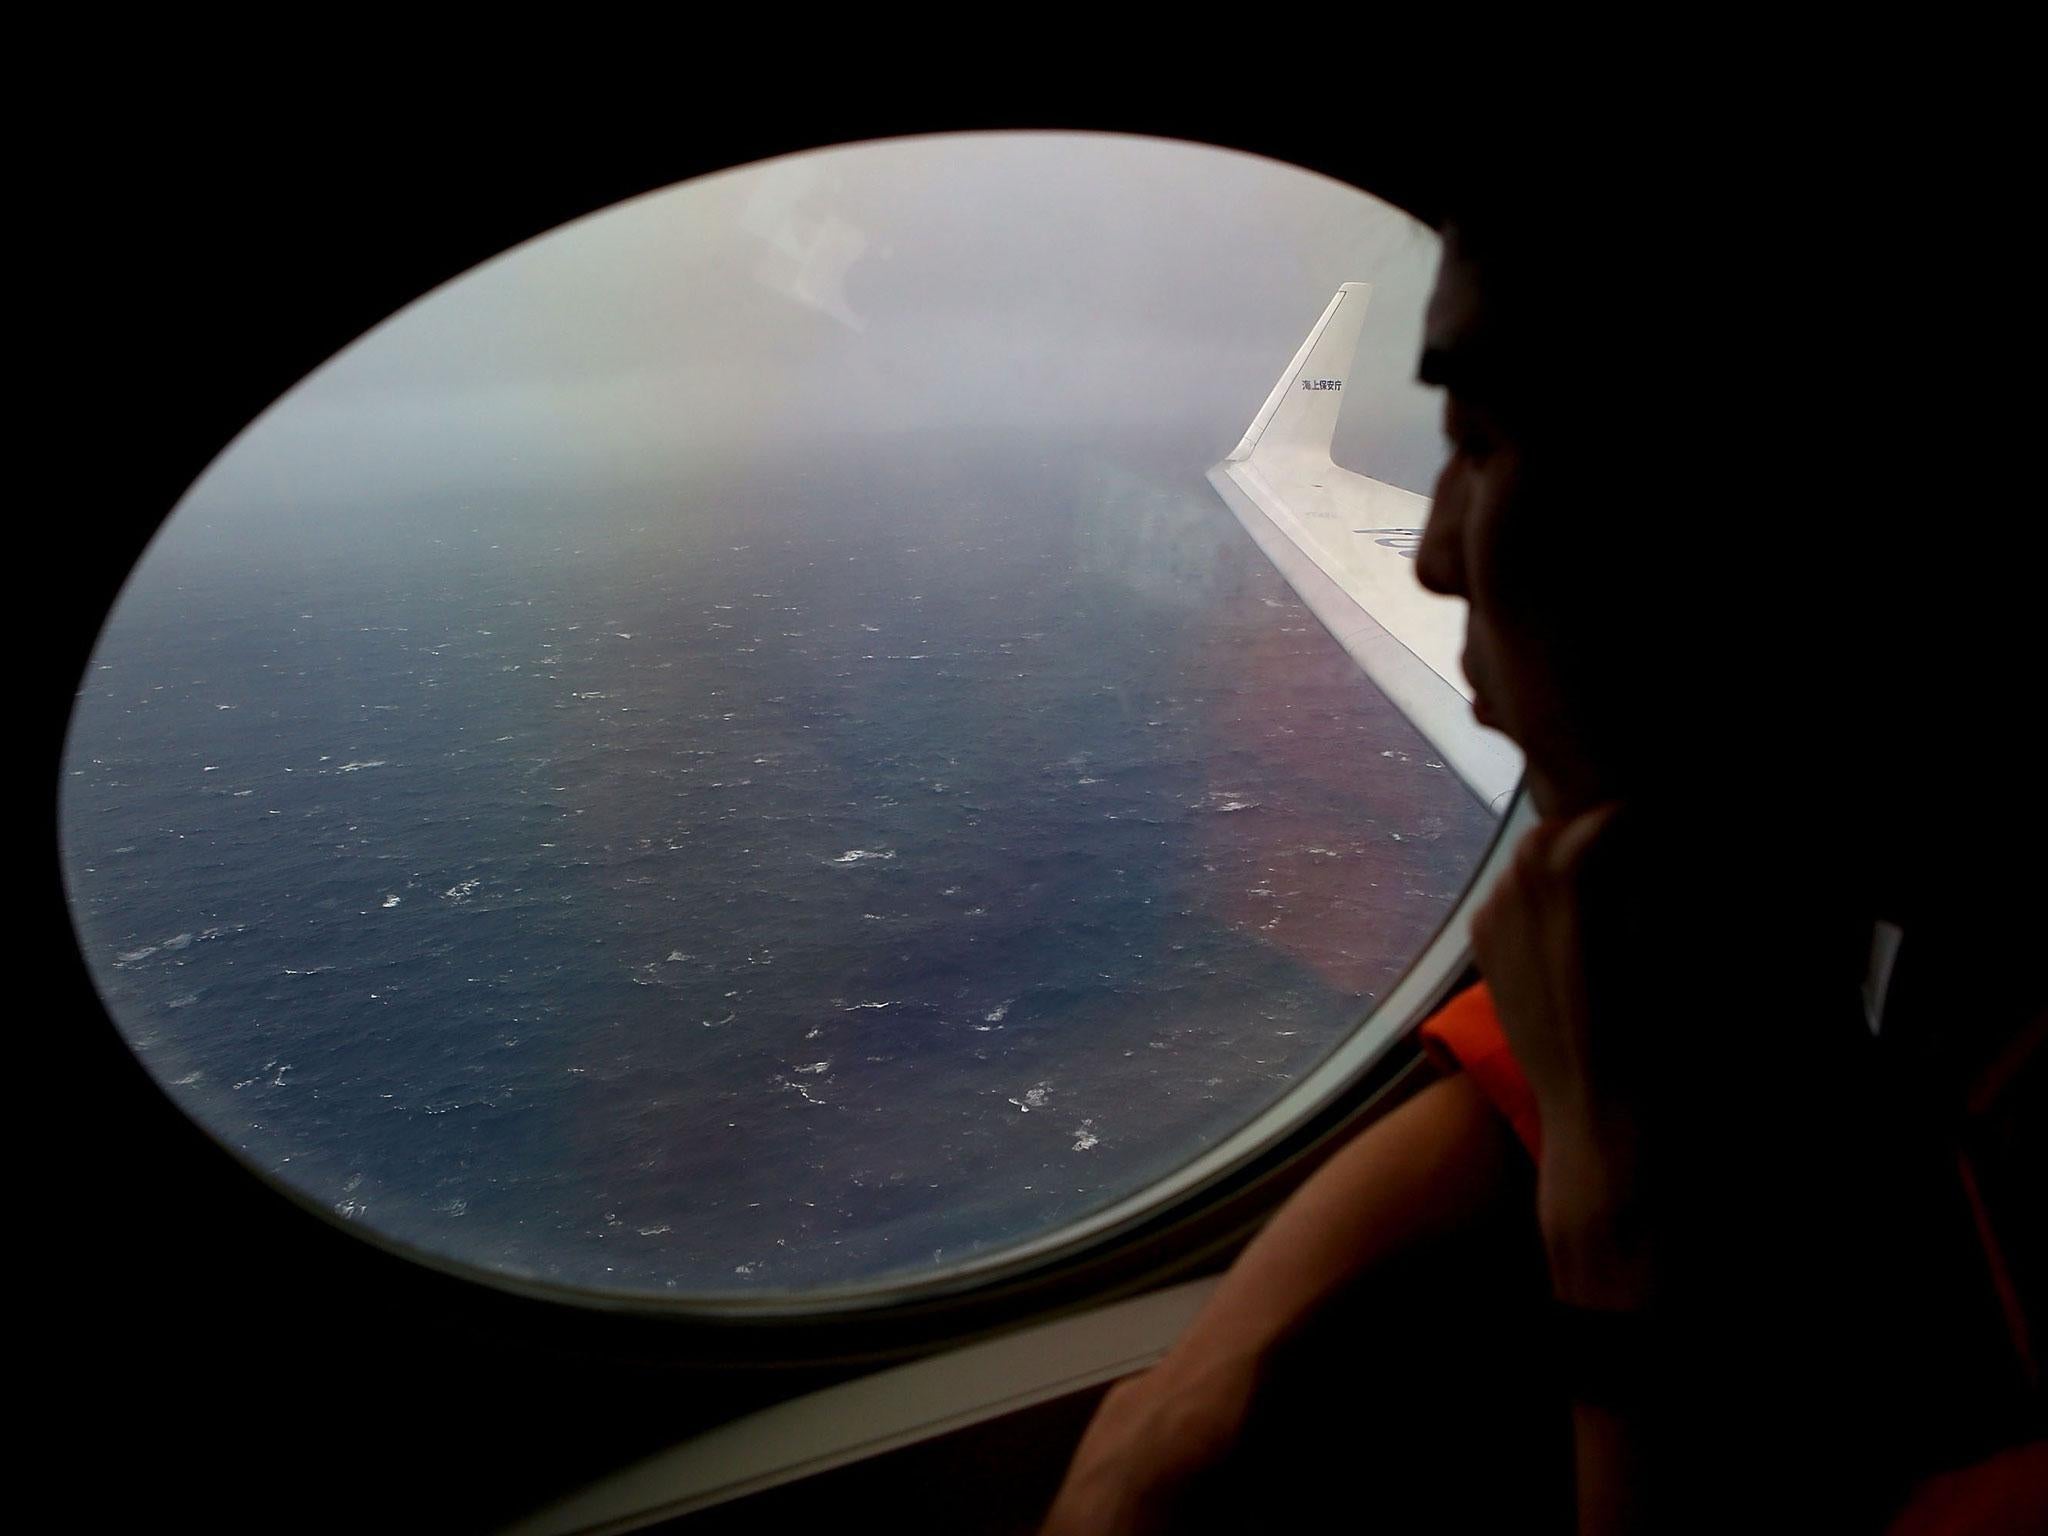 In a file picture taken on 1 April, Koji Kubota of the Japan Coast Guard keeps watch for debris from the missing flight MH370